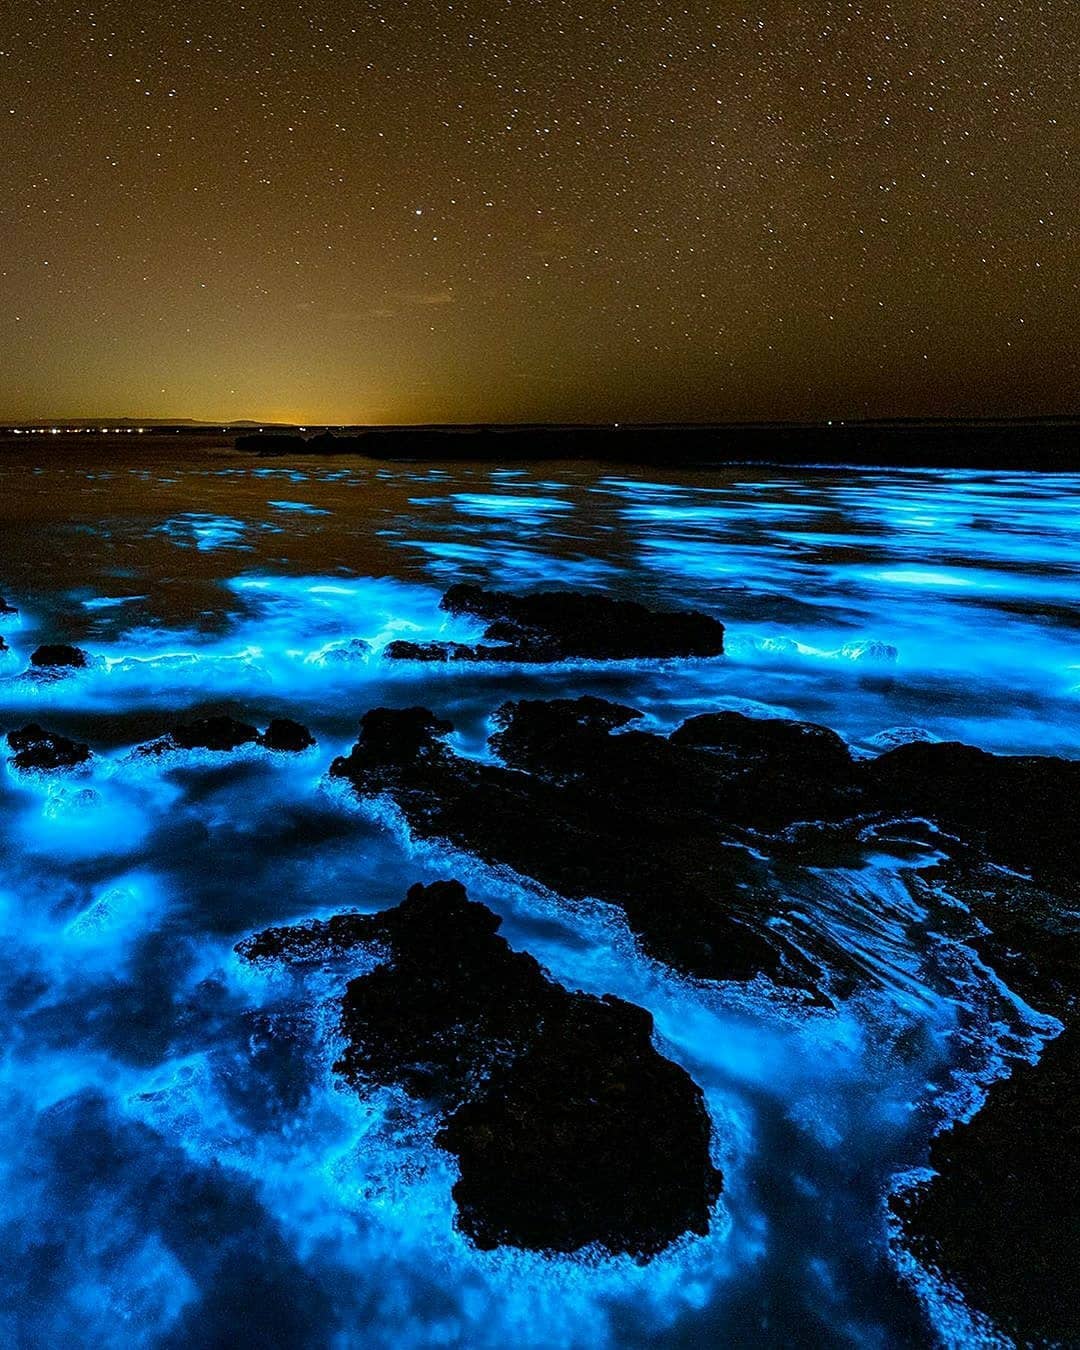 Australia extraordinary night beauty ▶
Reposted from @jordan_robins A few more video clips and photos of the incredible bioluminescent algae that was in Jervis Bay a few weeks ago!
Have you seen this amazing phenomenon before?
Swipe across to see the different videos and photos 🌌 #earthpix #discoverearth #ourplanetdaily #naturegeography #nakedplanet #earthcapture #earthfocus #seeaustralia #newsouthwales #jervisbay #bioluminescence #beautifuldestinations